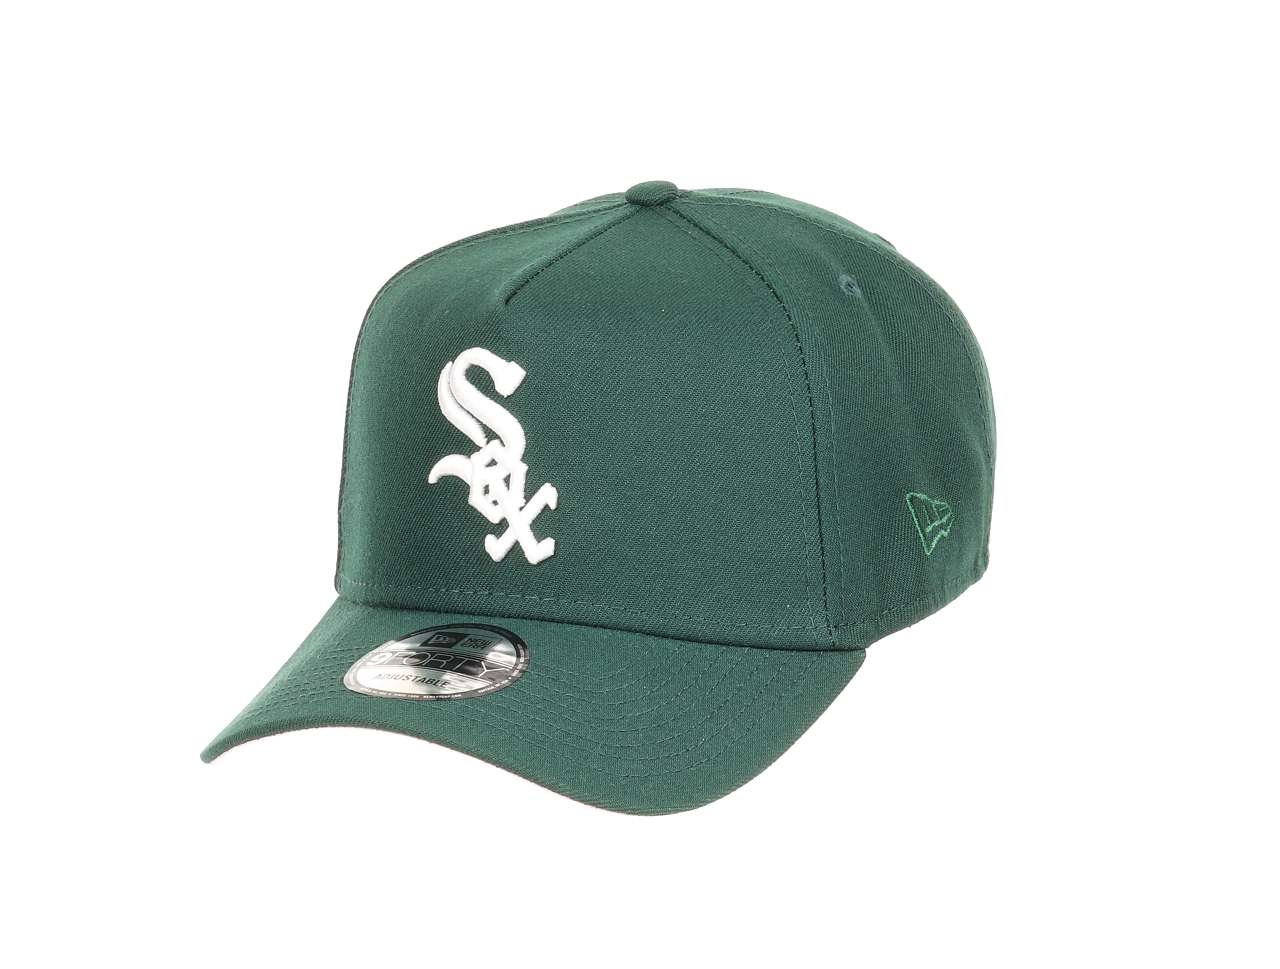 Chicago White Sox MLB World Series 2005 Sidepatch Dark Green 9Forty A-Frame Adjustable Cap New Era